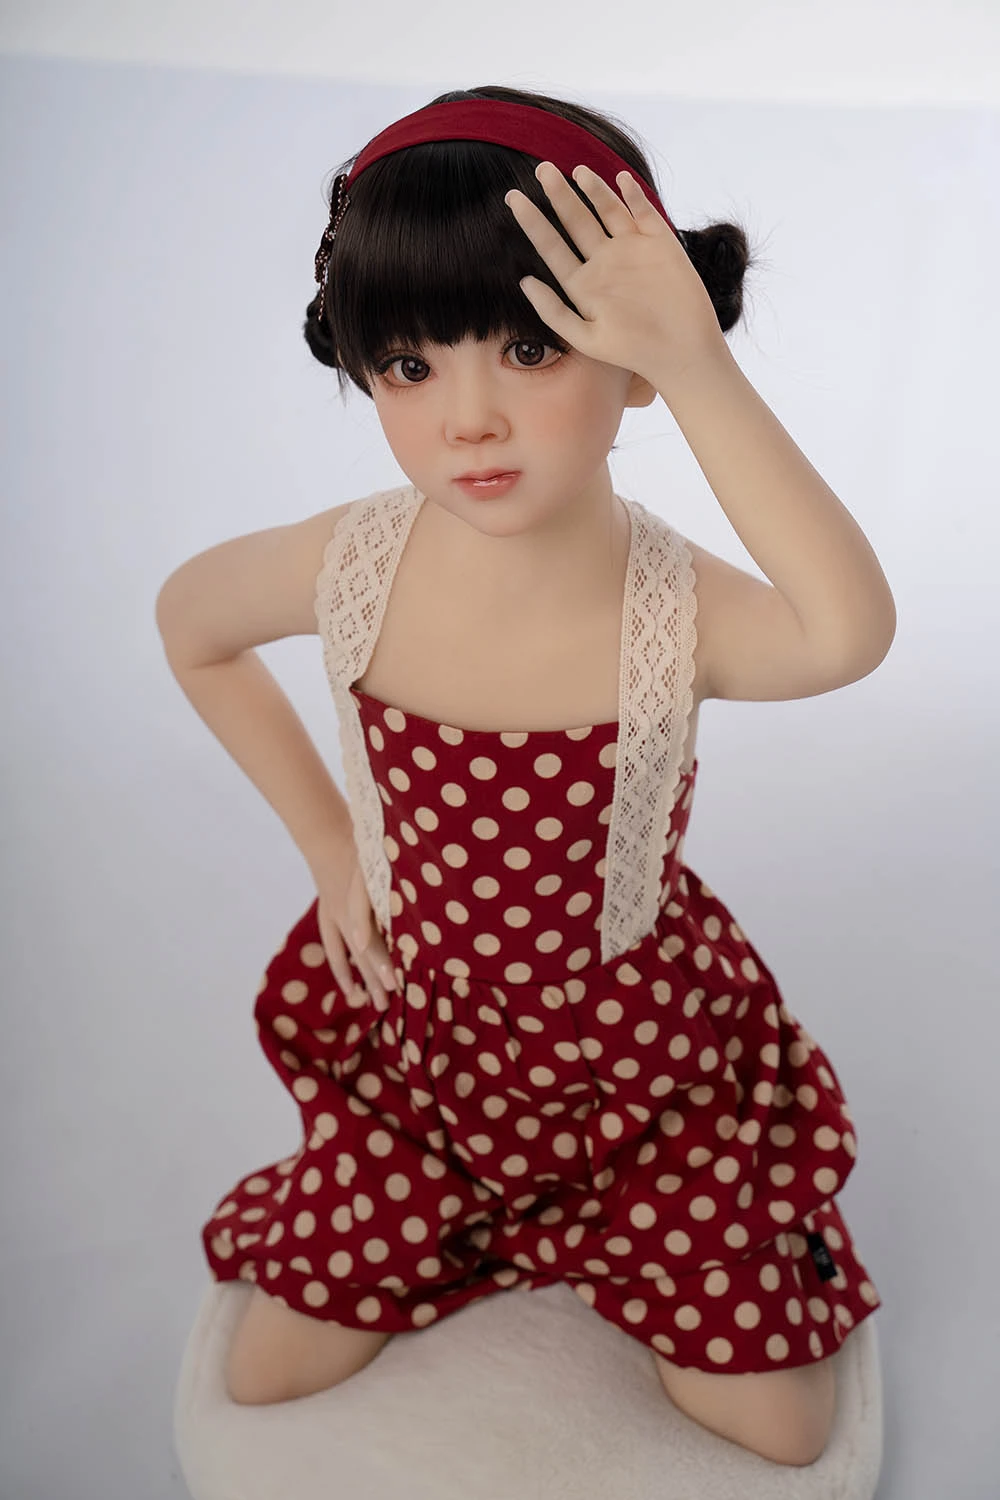 Cute and sexy sex doll